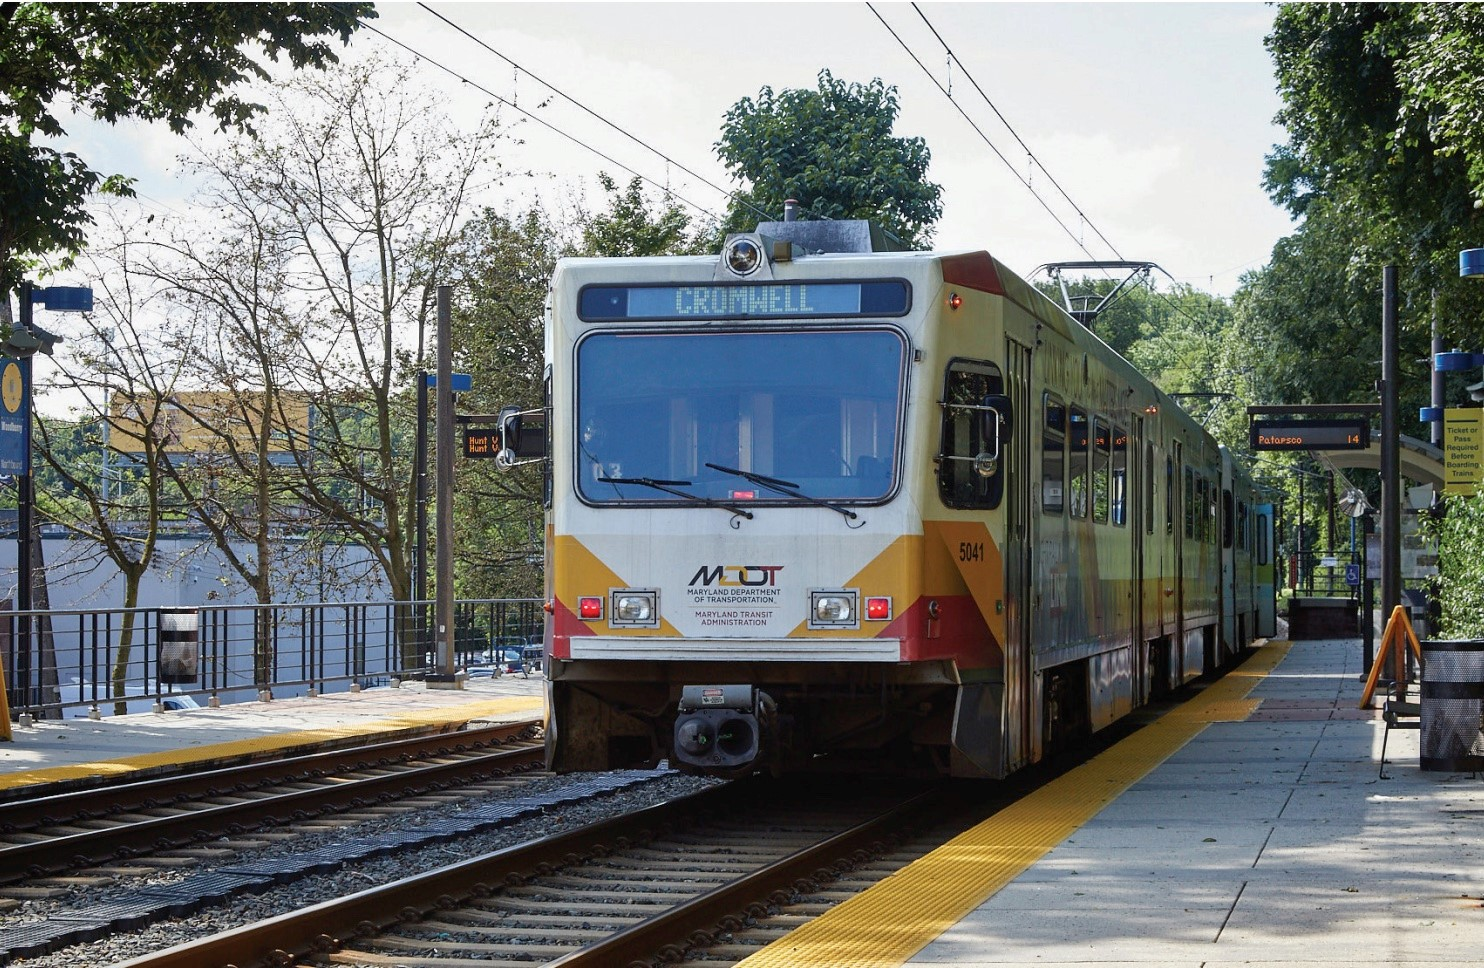 Re-imagining Baltimore's regional transit system: Three perspectives